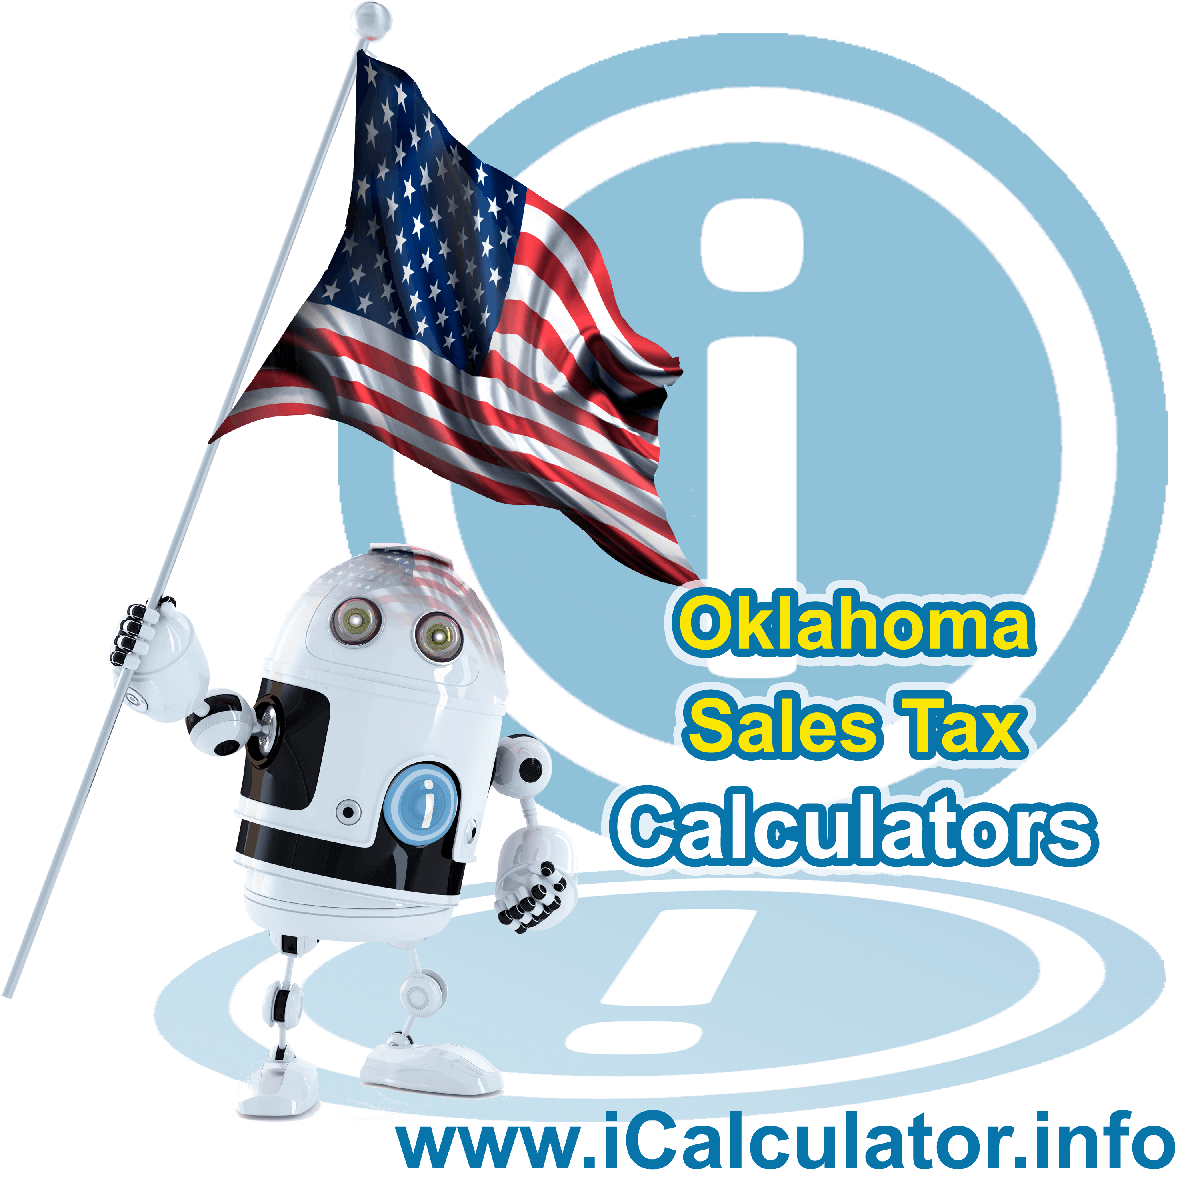 Oklahoma Sales Tax Comparison Calculator: This image illustrates a calculator robot comparing sales tax in Oklahoma manually using the Oklahoma Sales Tax Formula. You can use this information to compare Sales Tax manually or use the Oklahoma Sales Tax Comparison Calculator to calculate and compare Oklahoma sales tax online.